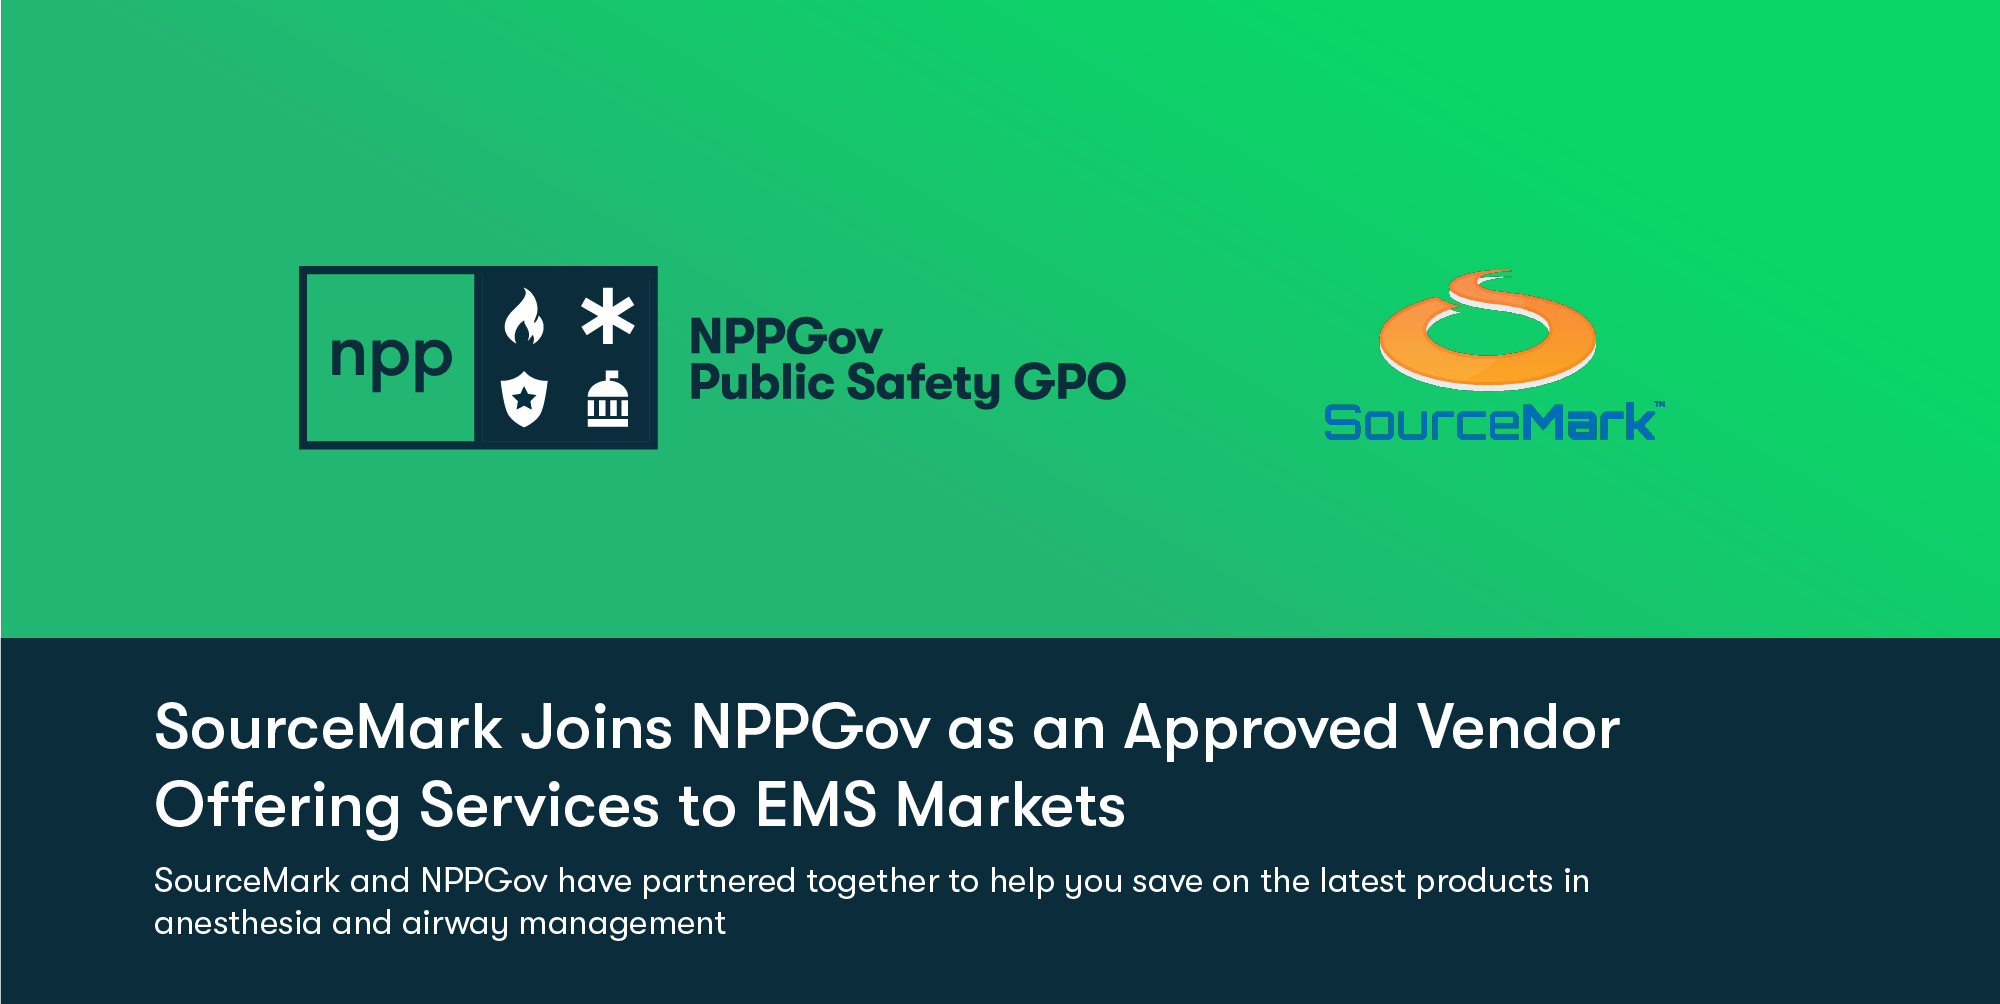 NPPGov Signs SourceMark as a Vendor for its GPO